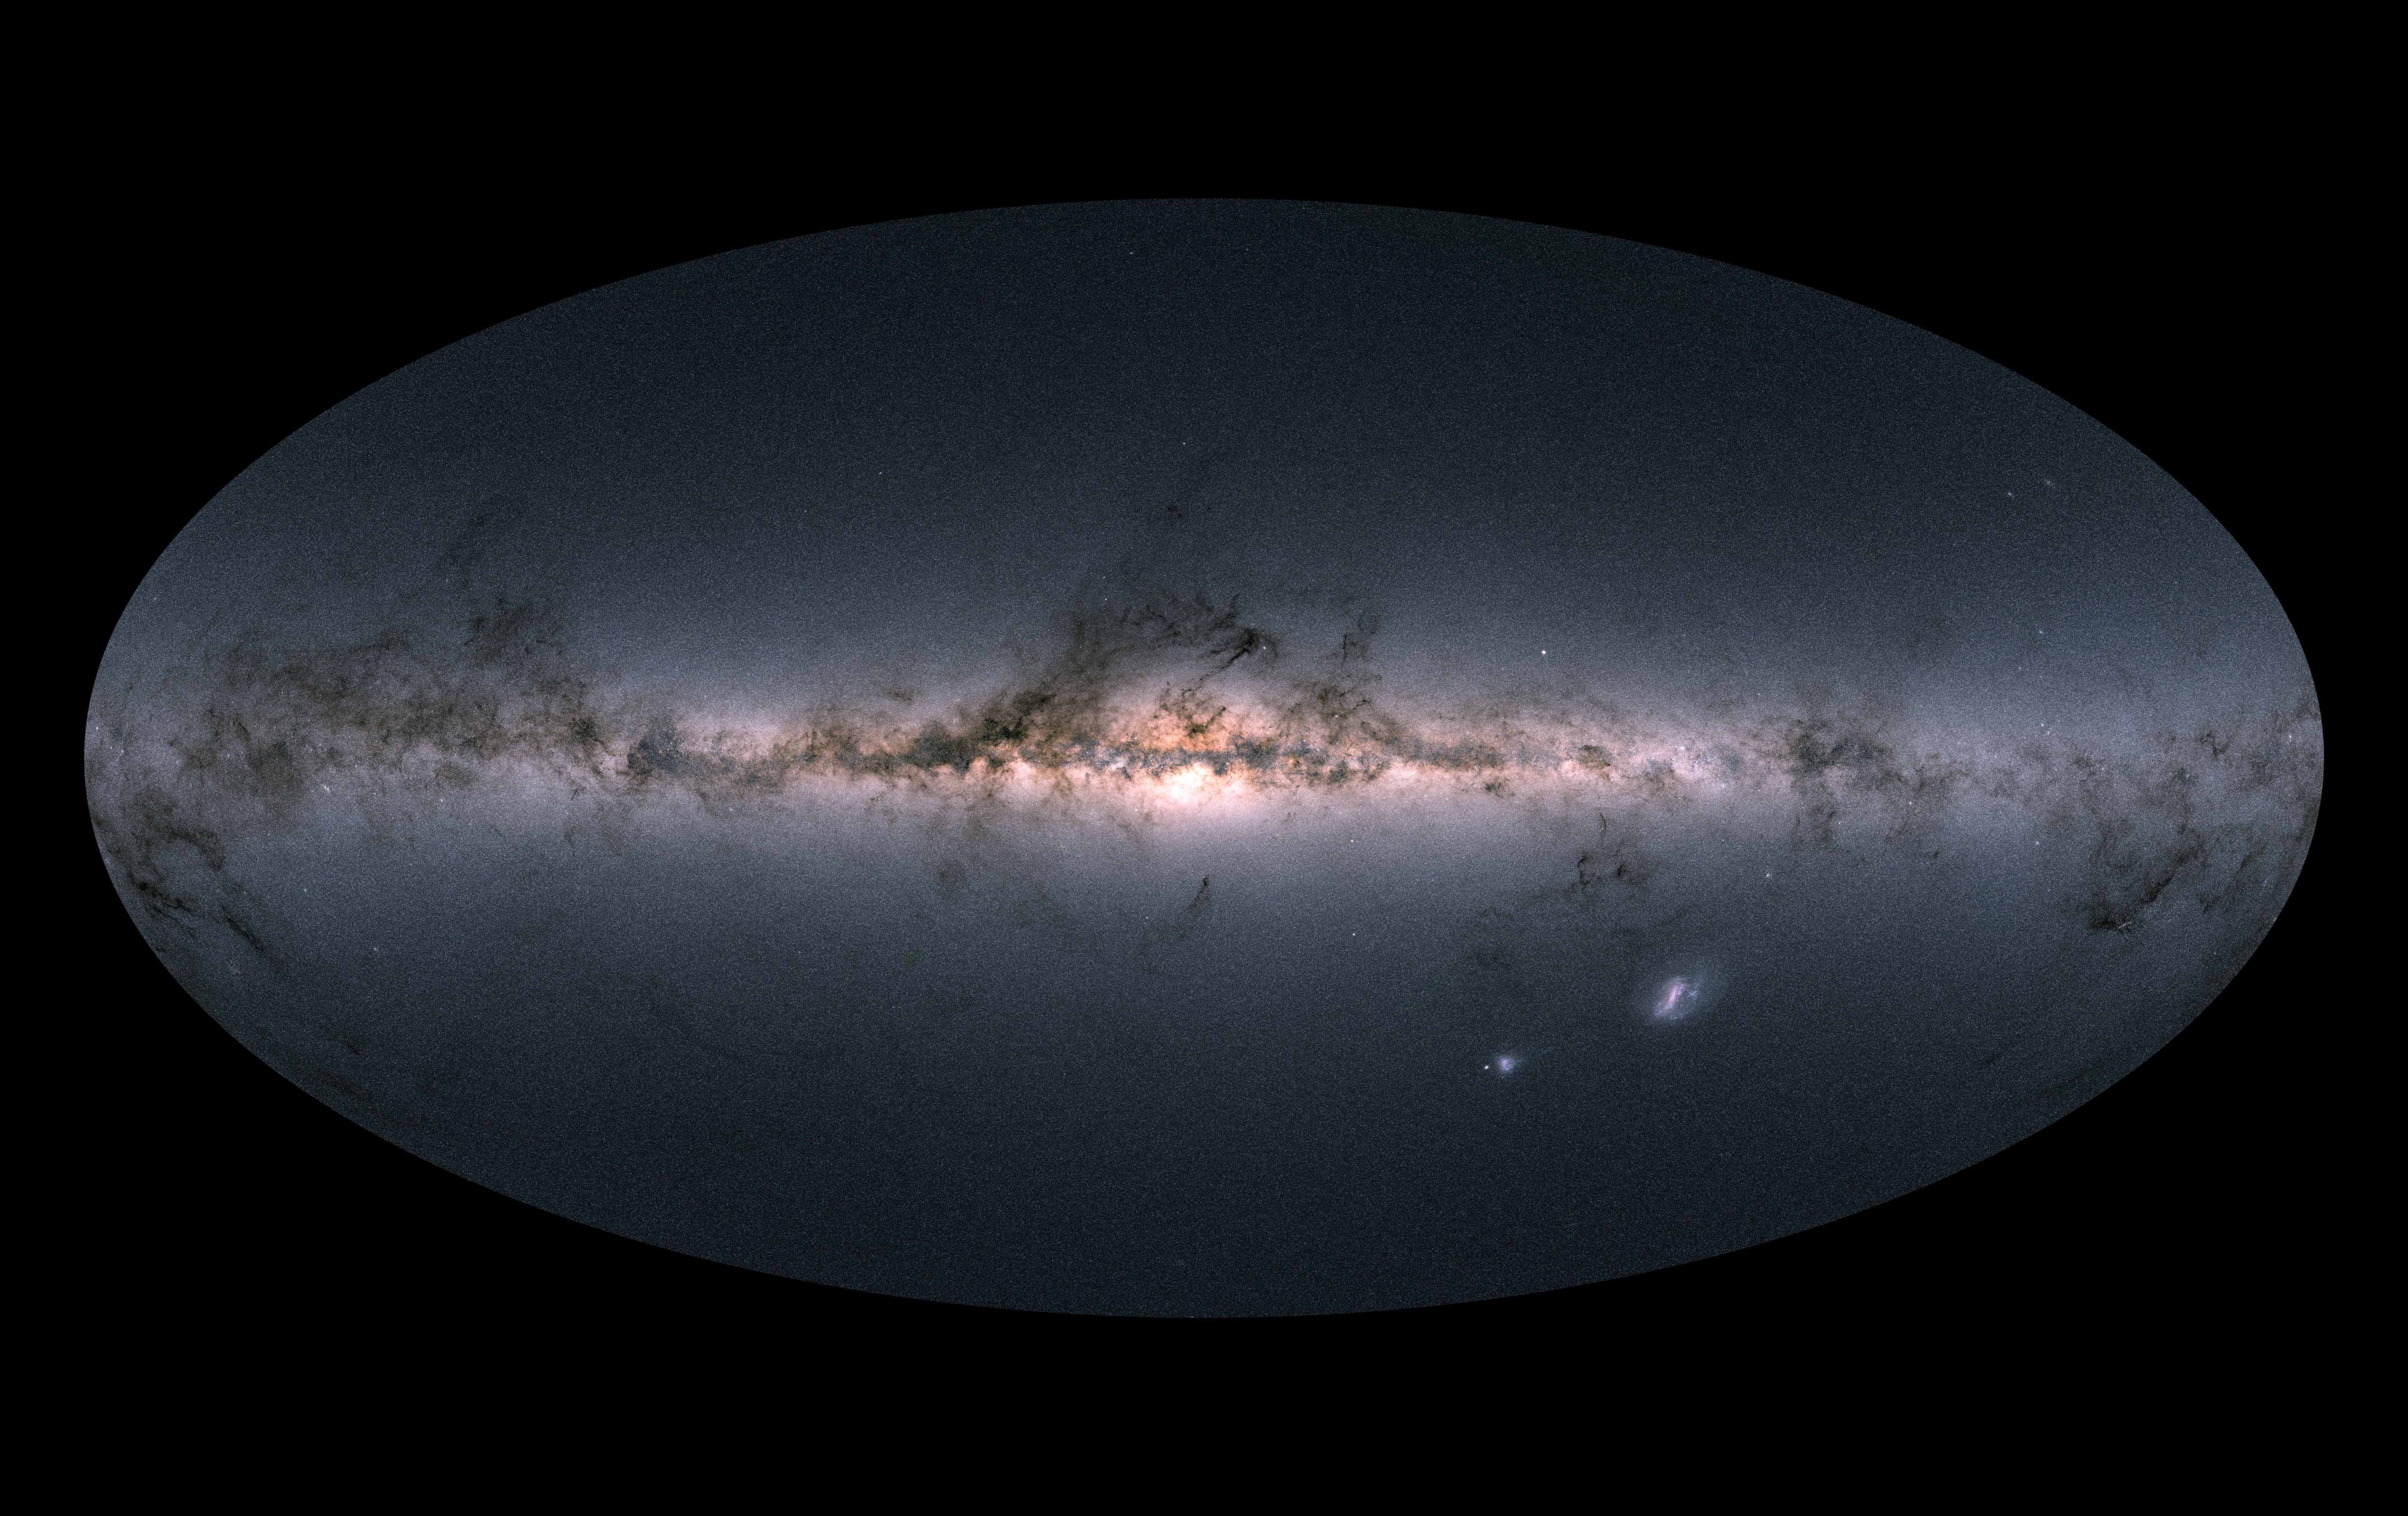 Gaia’s all-sky view of our Milky Way Galaxy and neighboring galaxies, based on measurements of nearly 1.7 billion stars. The map shows the total brightness and color of stars observed by the ESA satellite in each portion of the sky between July 2014 and May 2016. Credit: ESA.